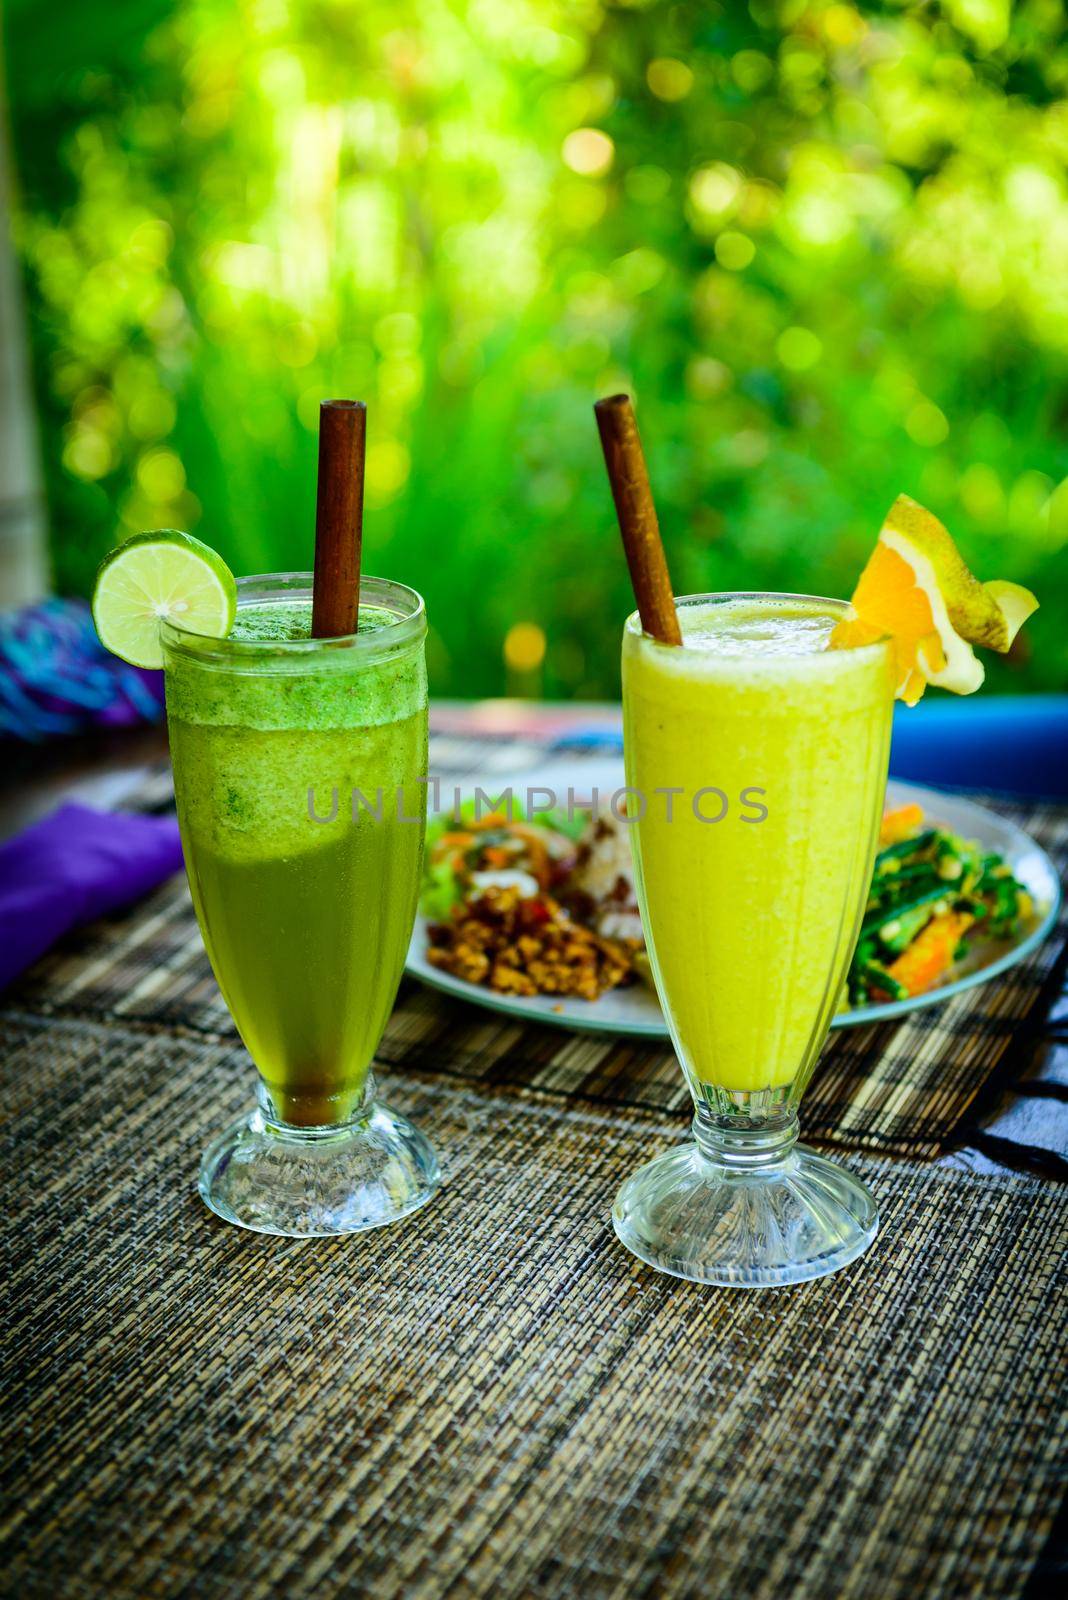 Healthy organic drinks served with traditional Bali food